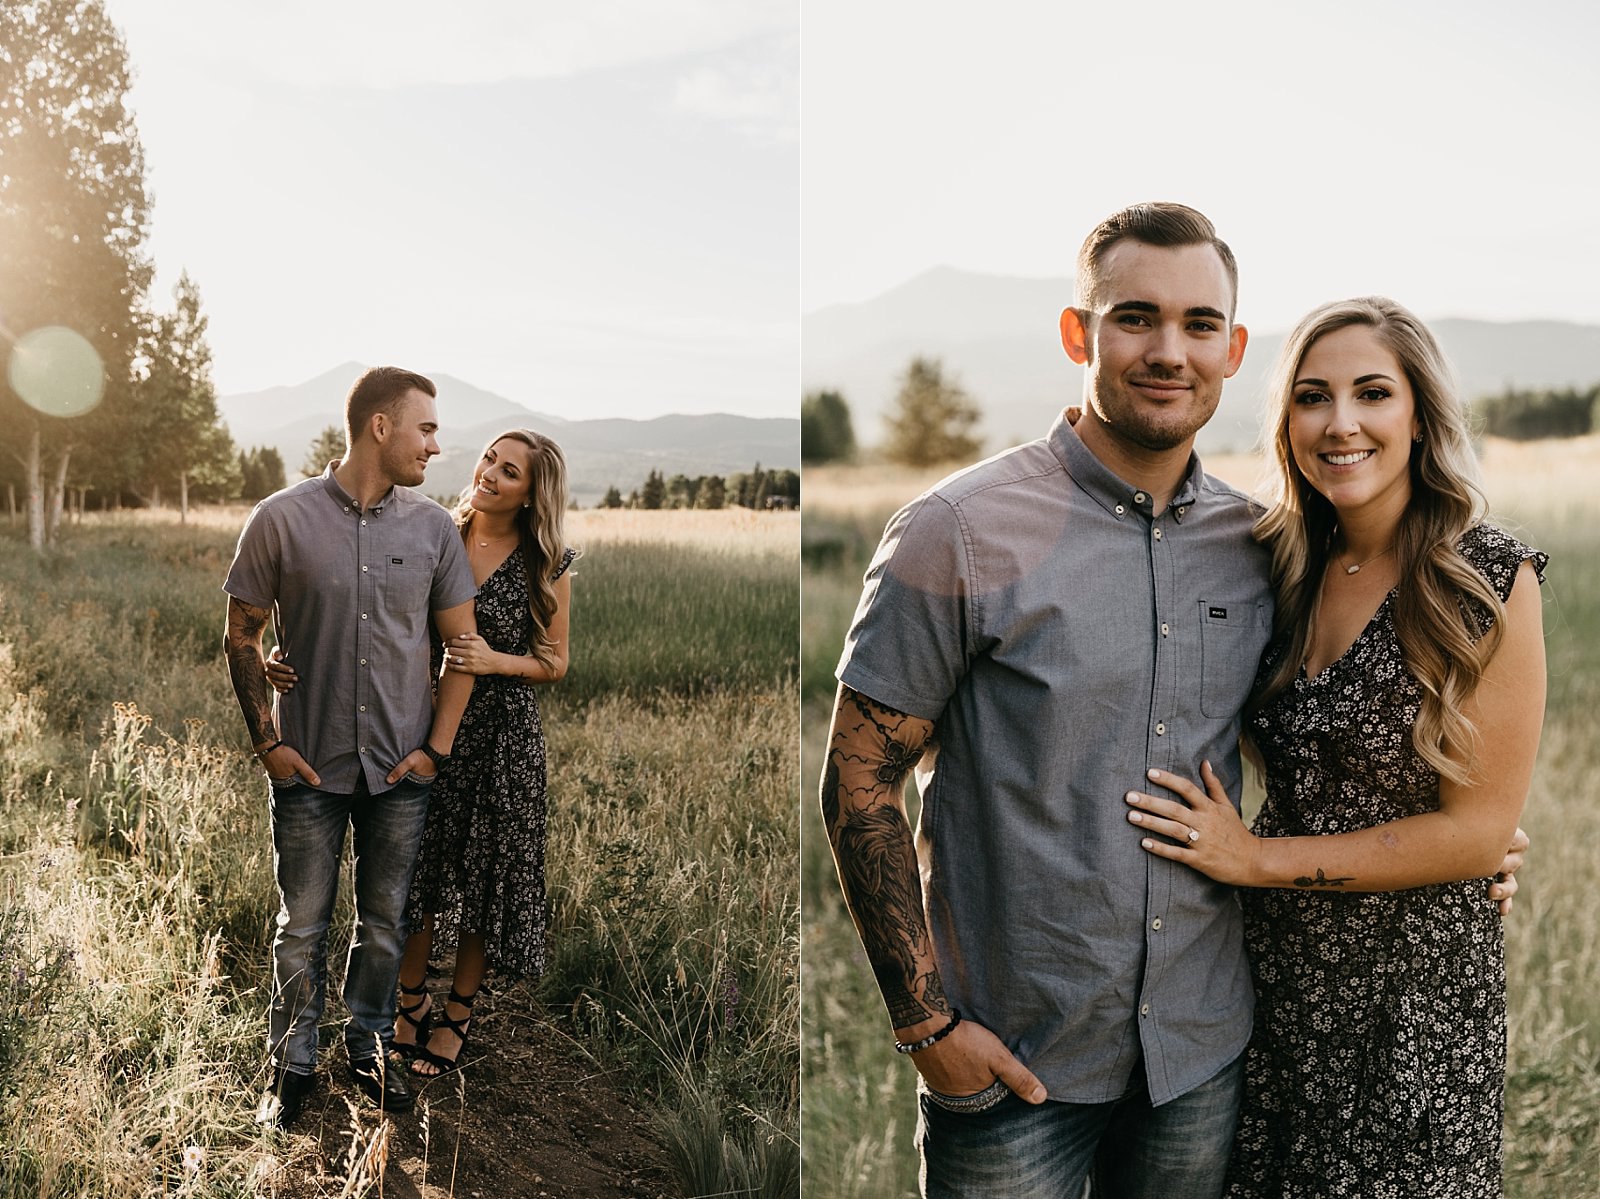 classic timeless posing mountaintop field with trees engagement photos Flagstaff AZ Samantha Patri Photography